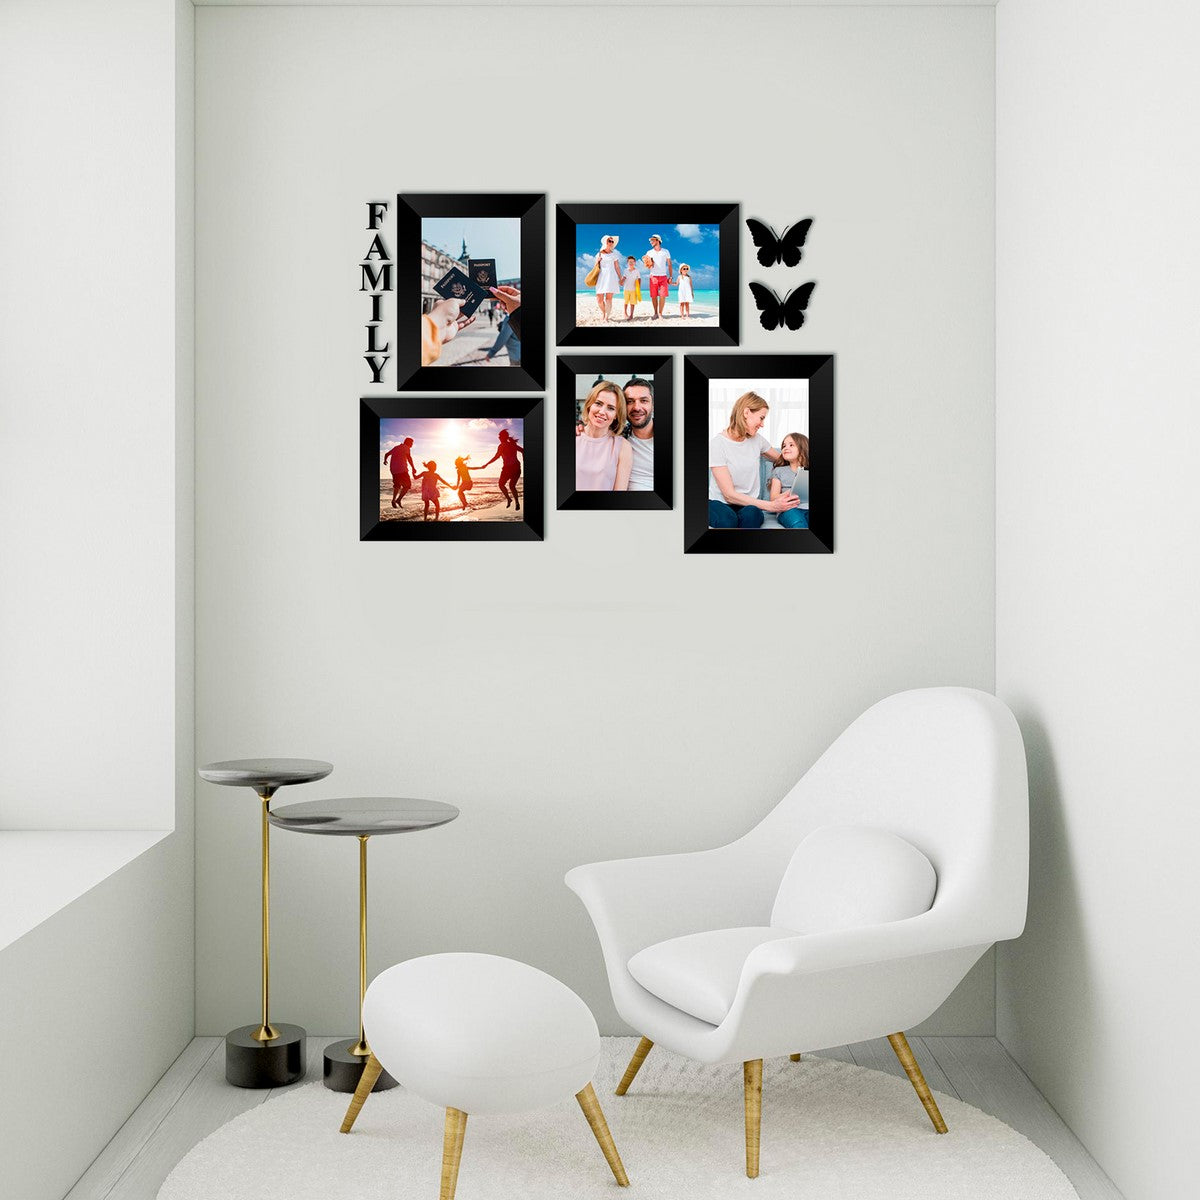 Memory Wall Collage Photo Frame - Set of 5 Photo Frames for 1 Photos of 4"x6", 4 Photos of 5"x7", 1 Piece of FAMILY, 2 Pieces of BUTTERFLIES 2